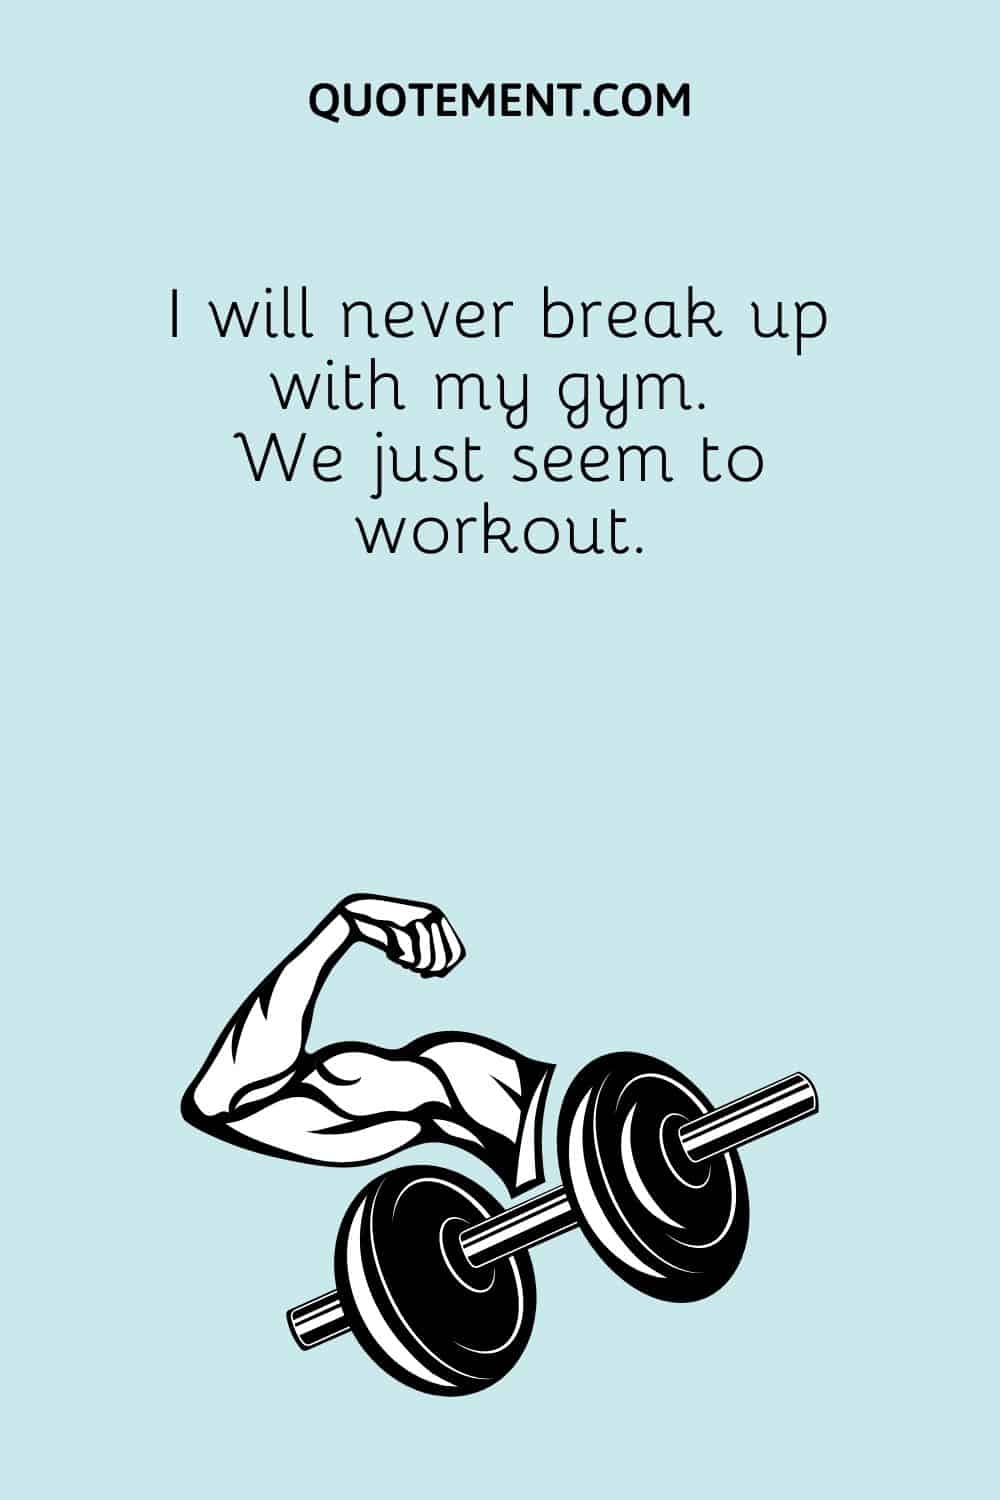 I will never break up with my gym. We just seem to workout.